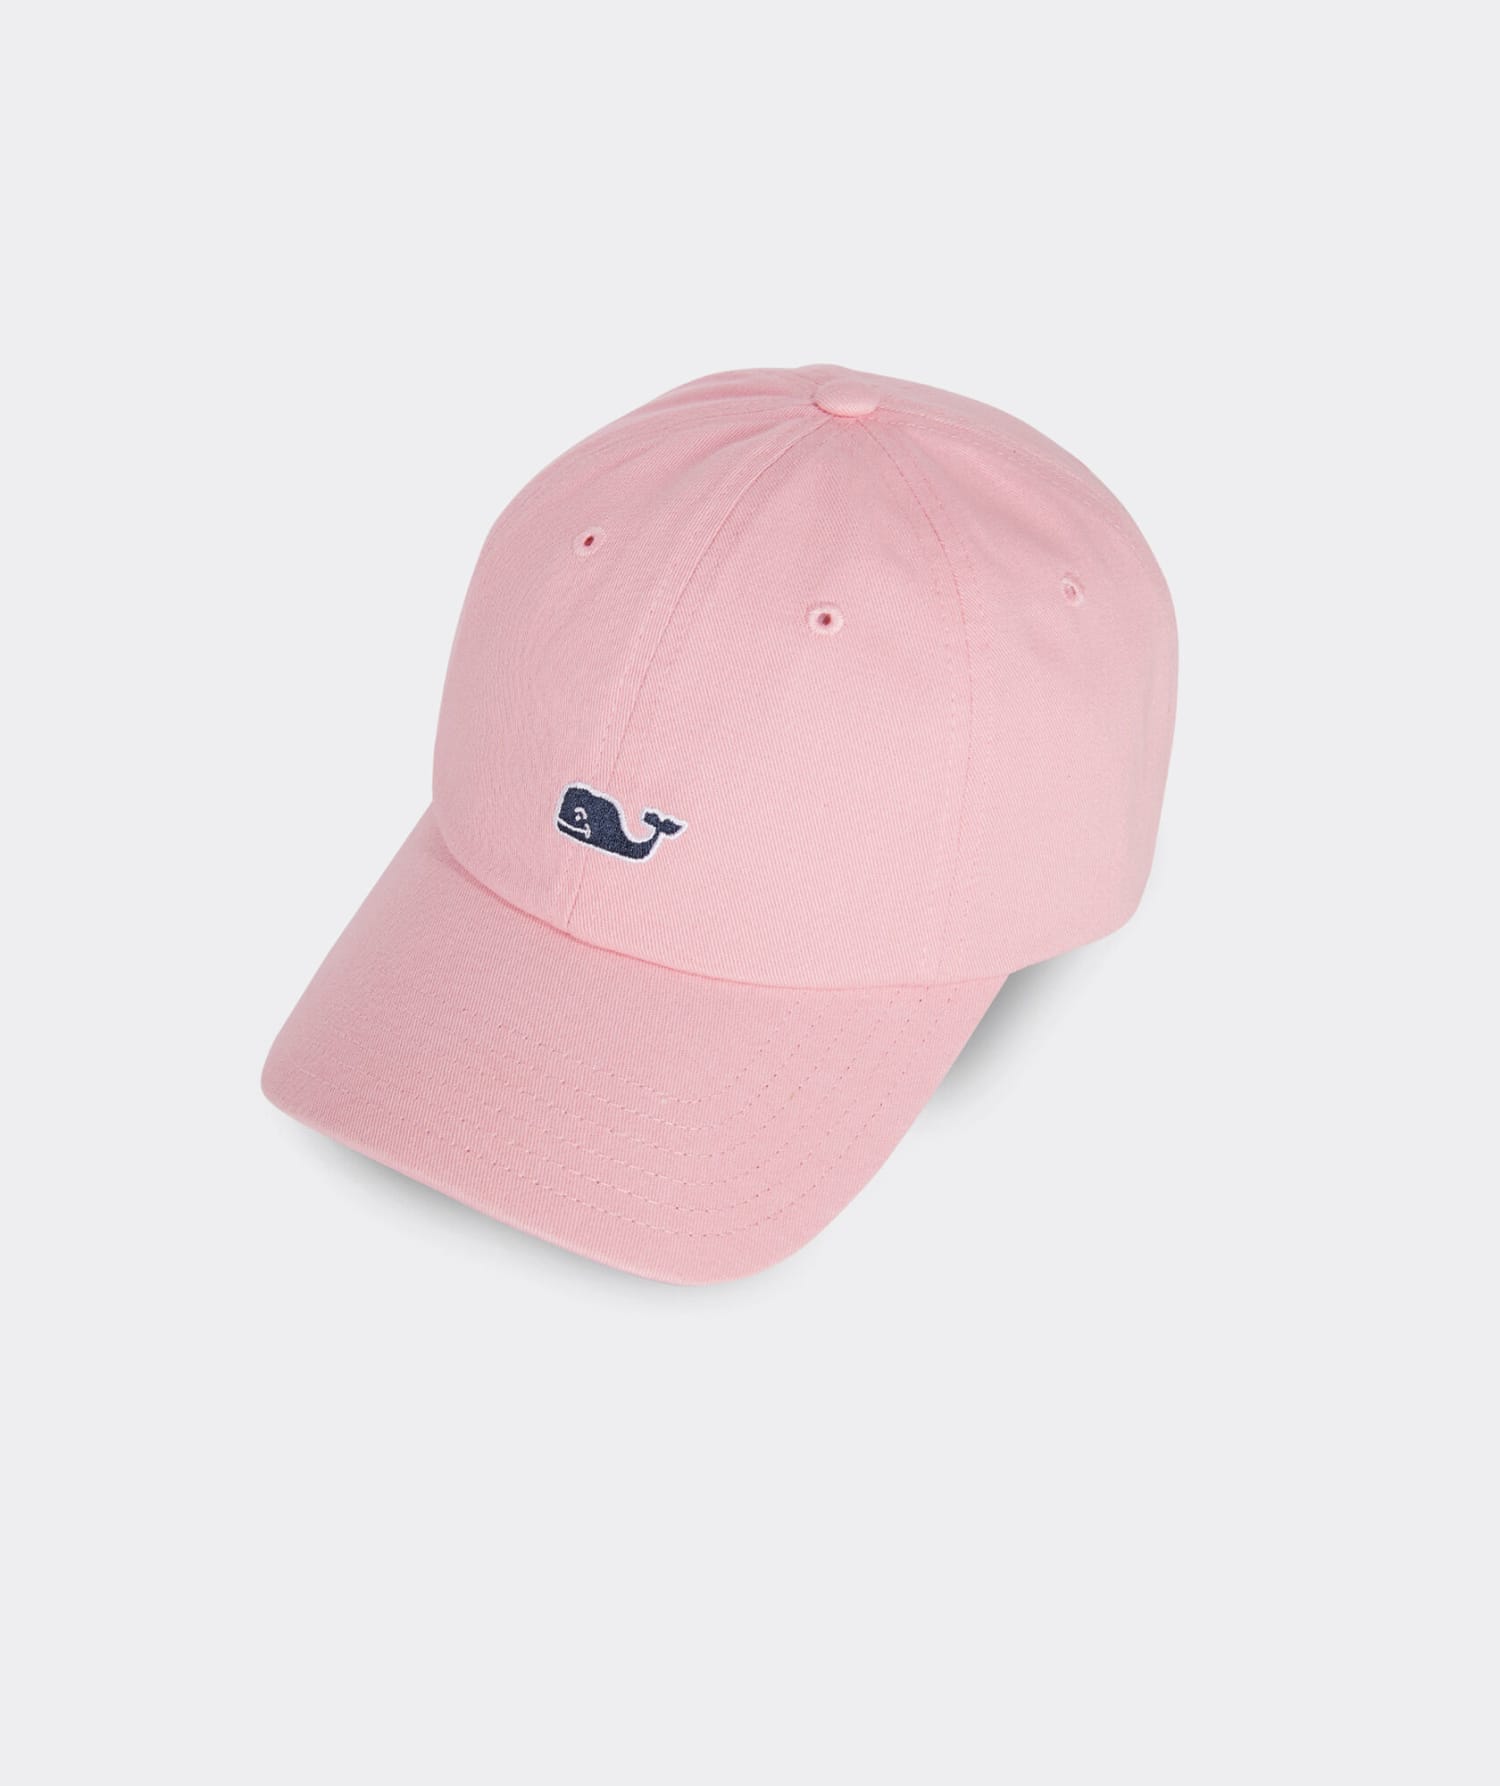 Louise Empty Top Baseball Caps Breathable Trucker Hat Leaky Top